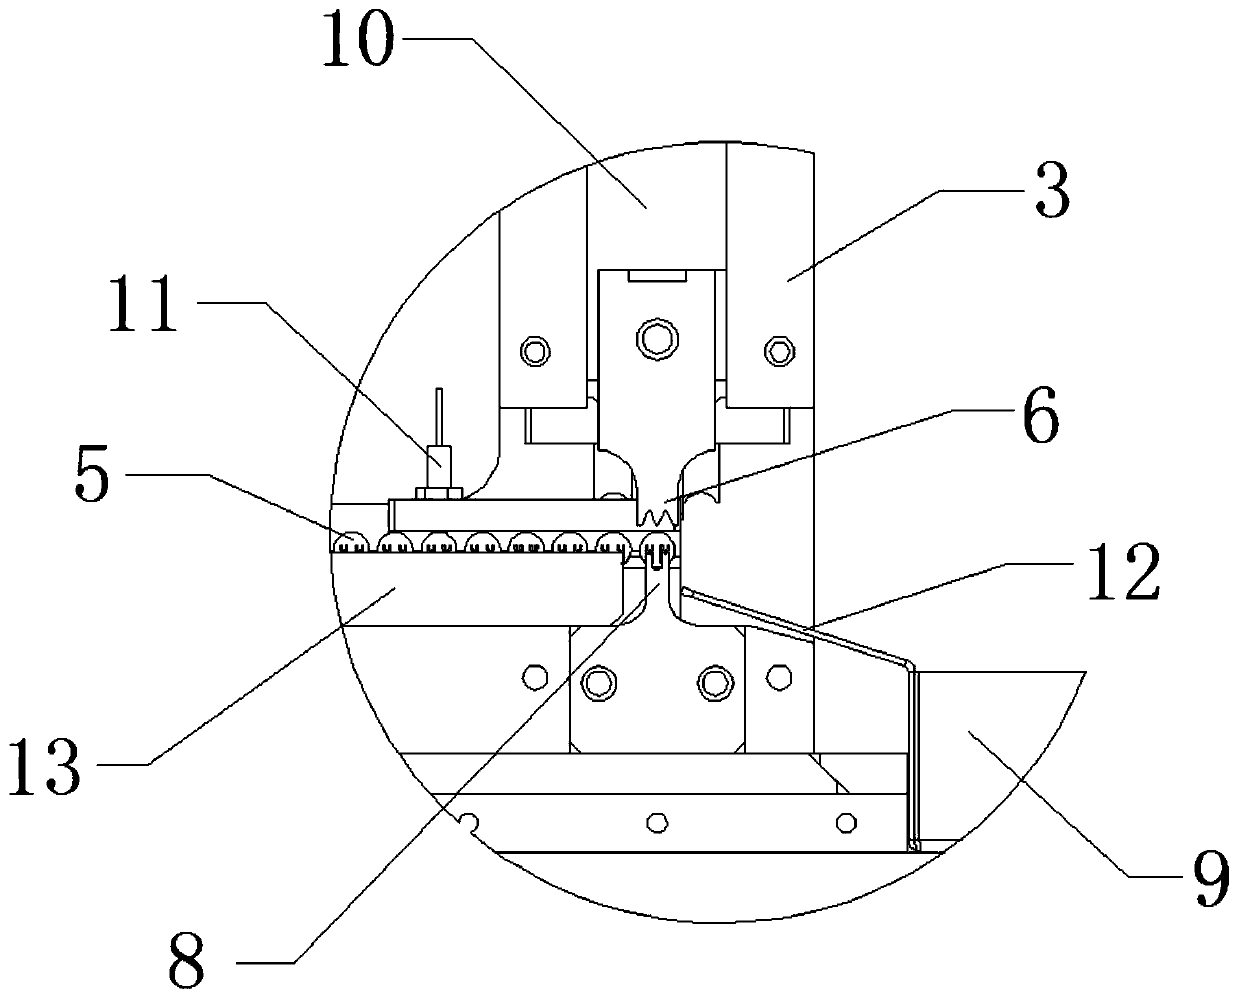 Electronic detonator chip leg wire riveting device and processing flow based on same